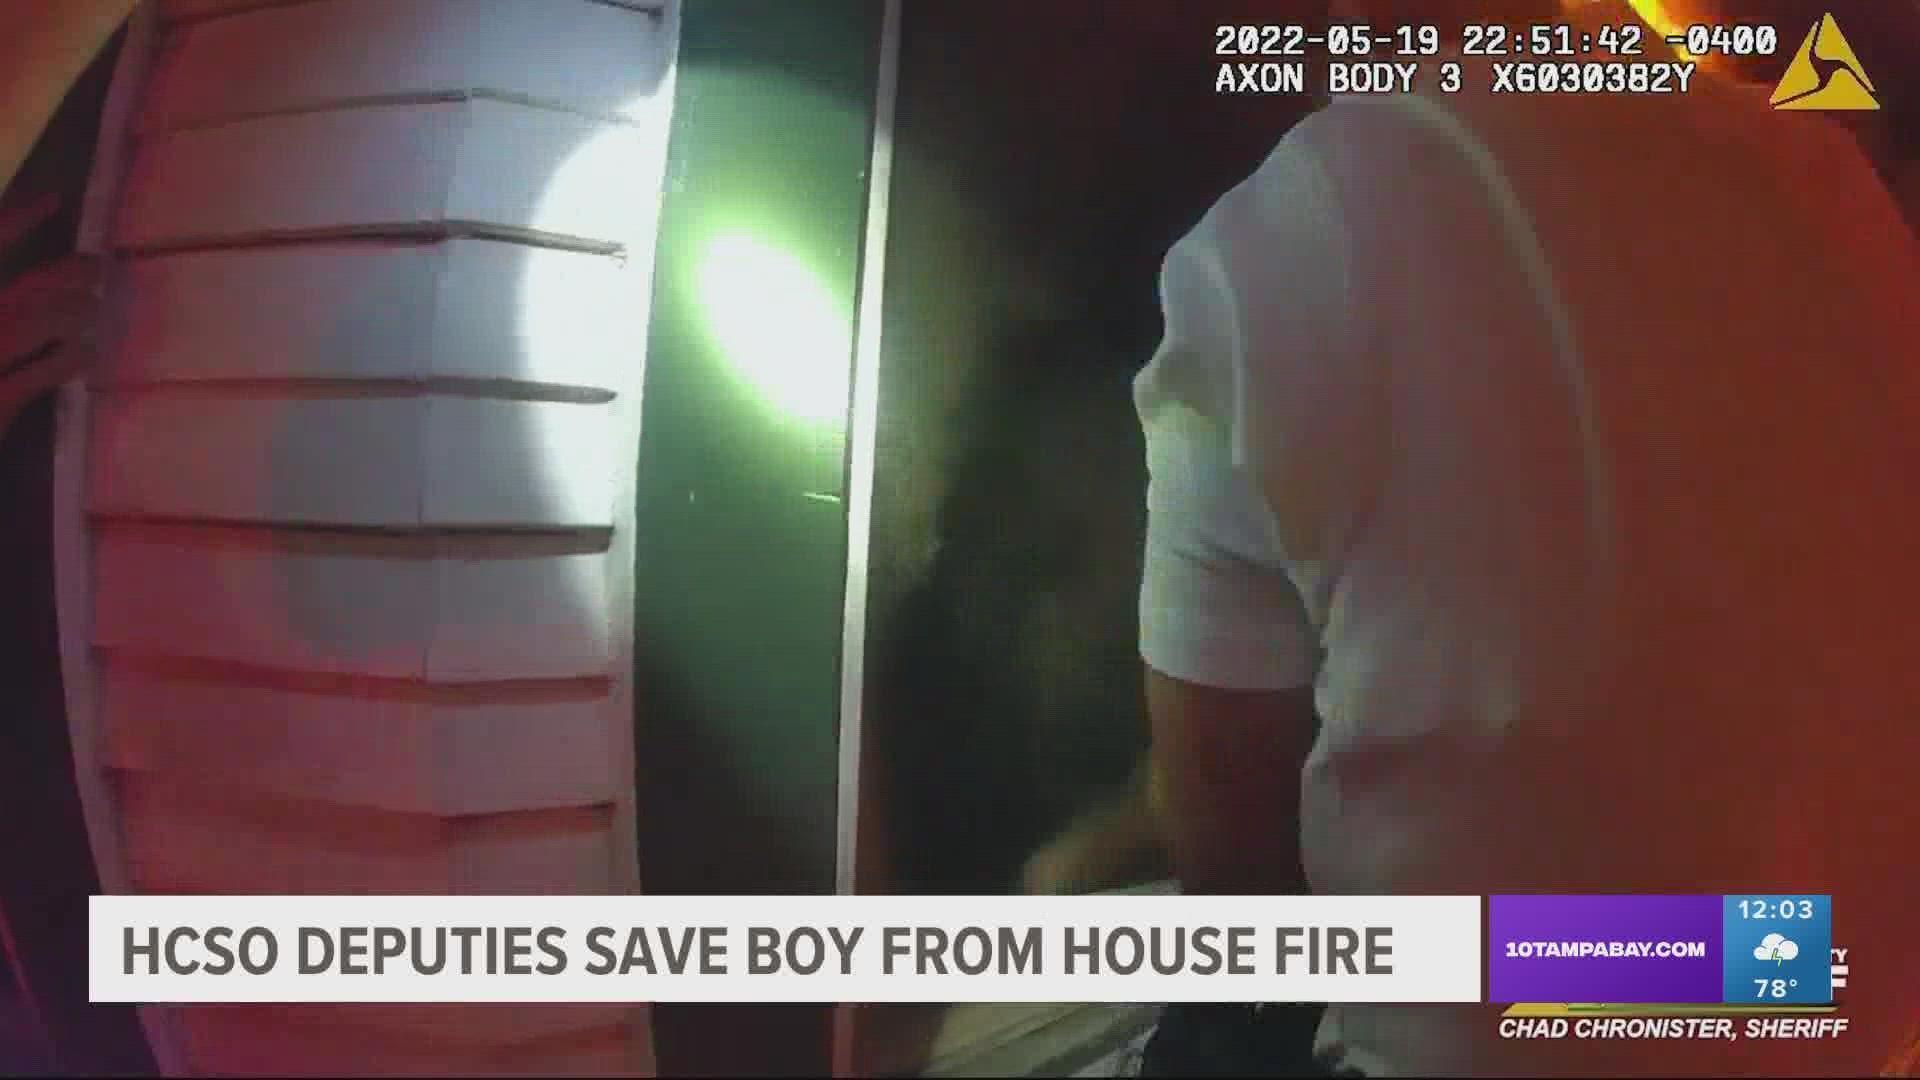 The 9-year-old suffered from burns and smoke inhalation.